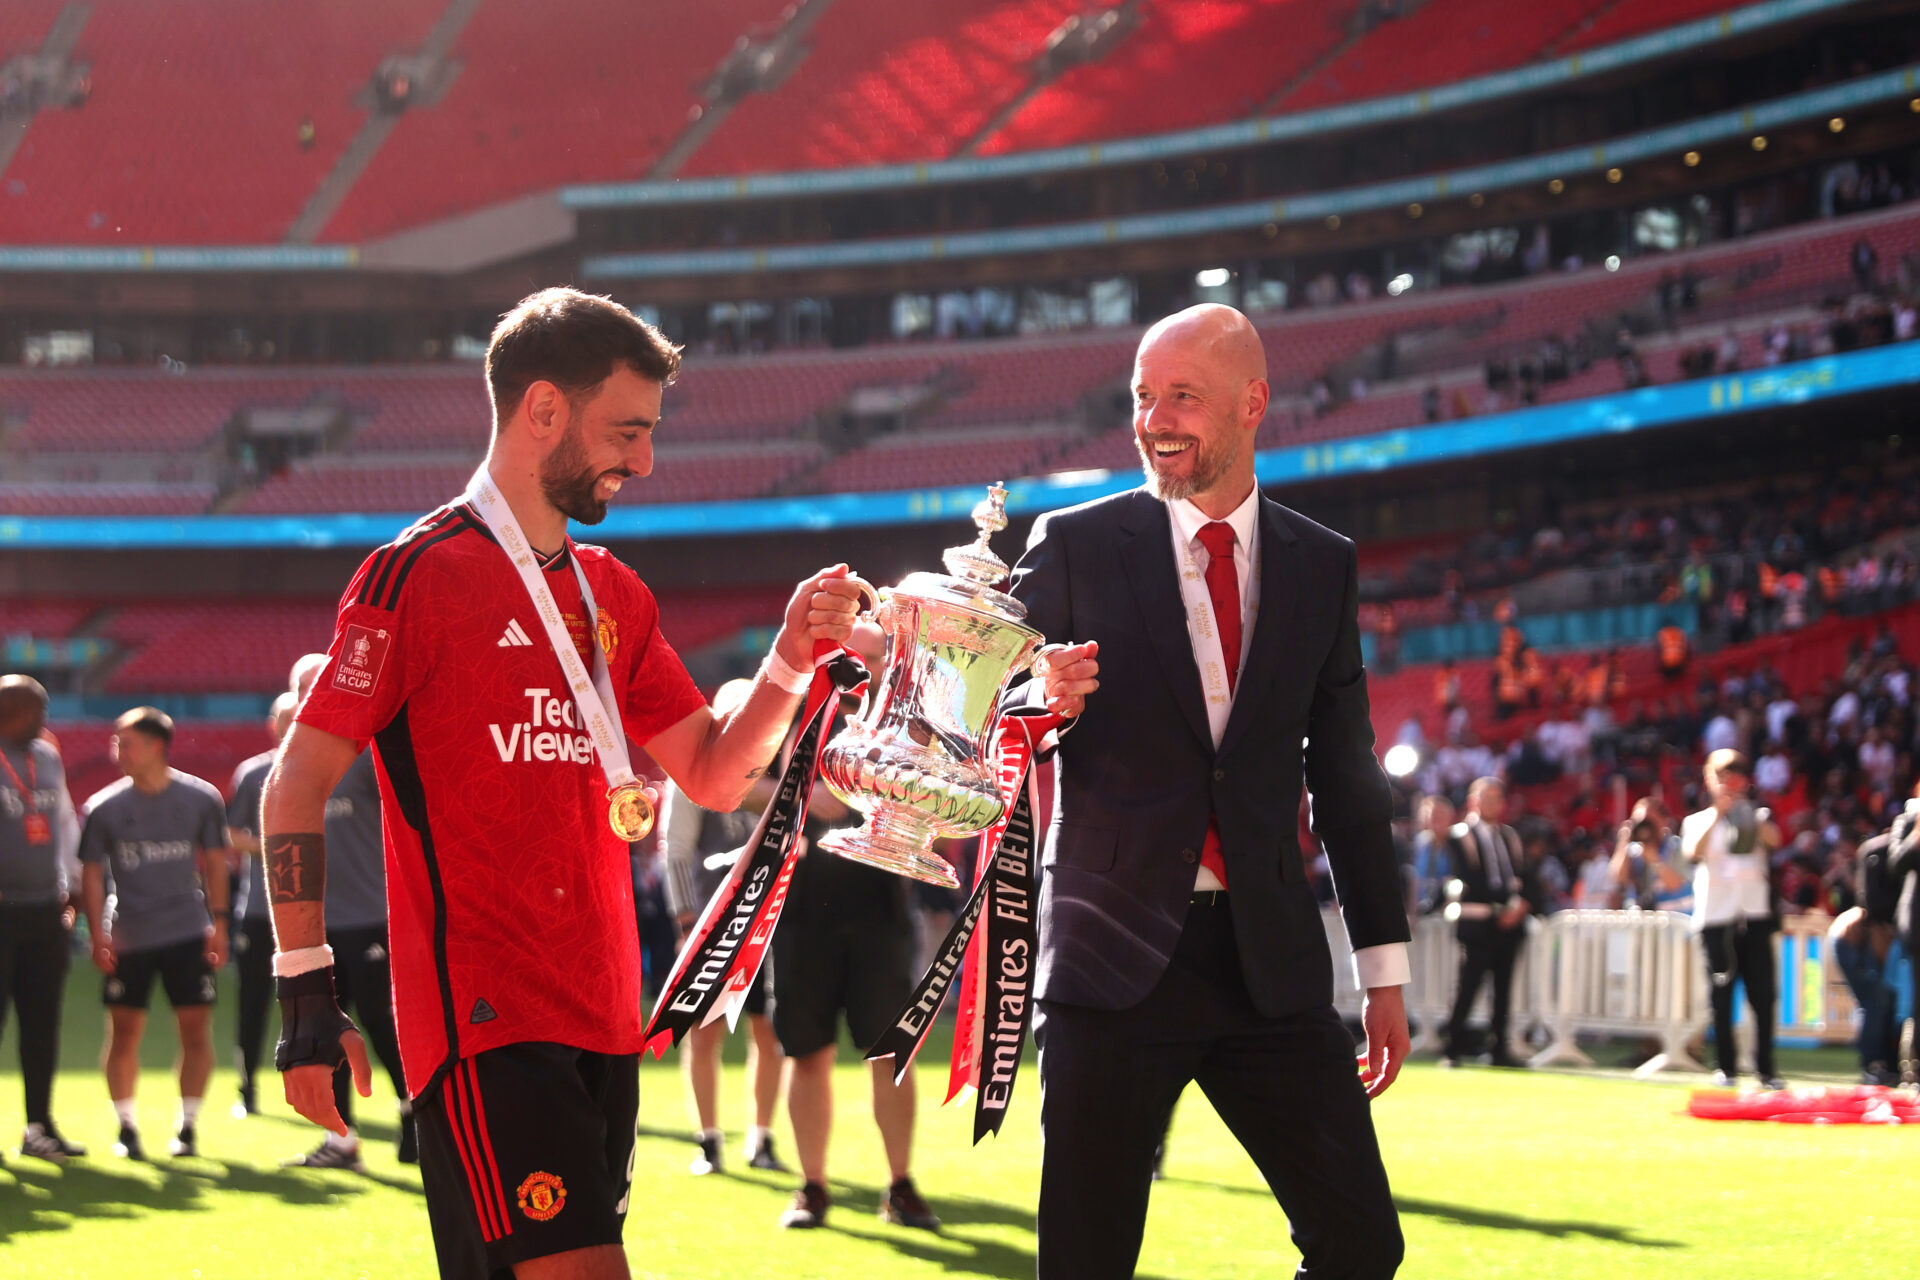 Manchester United vs Manchester City Ten Hag and Bruno with FA Cup